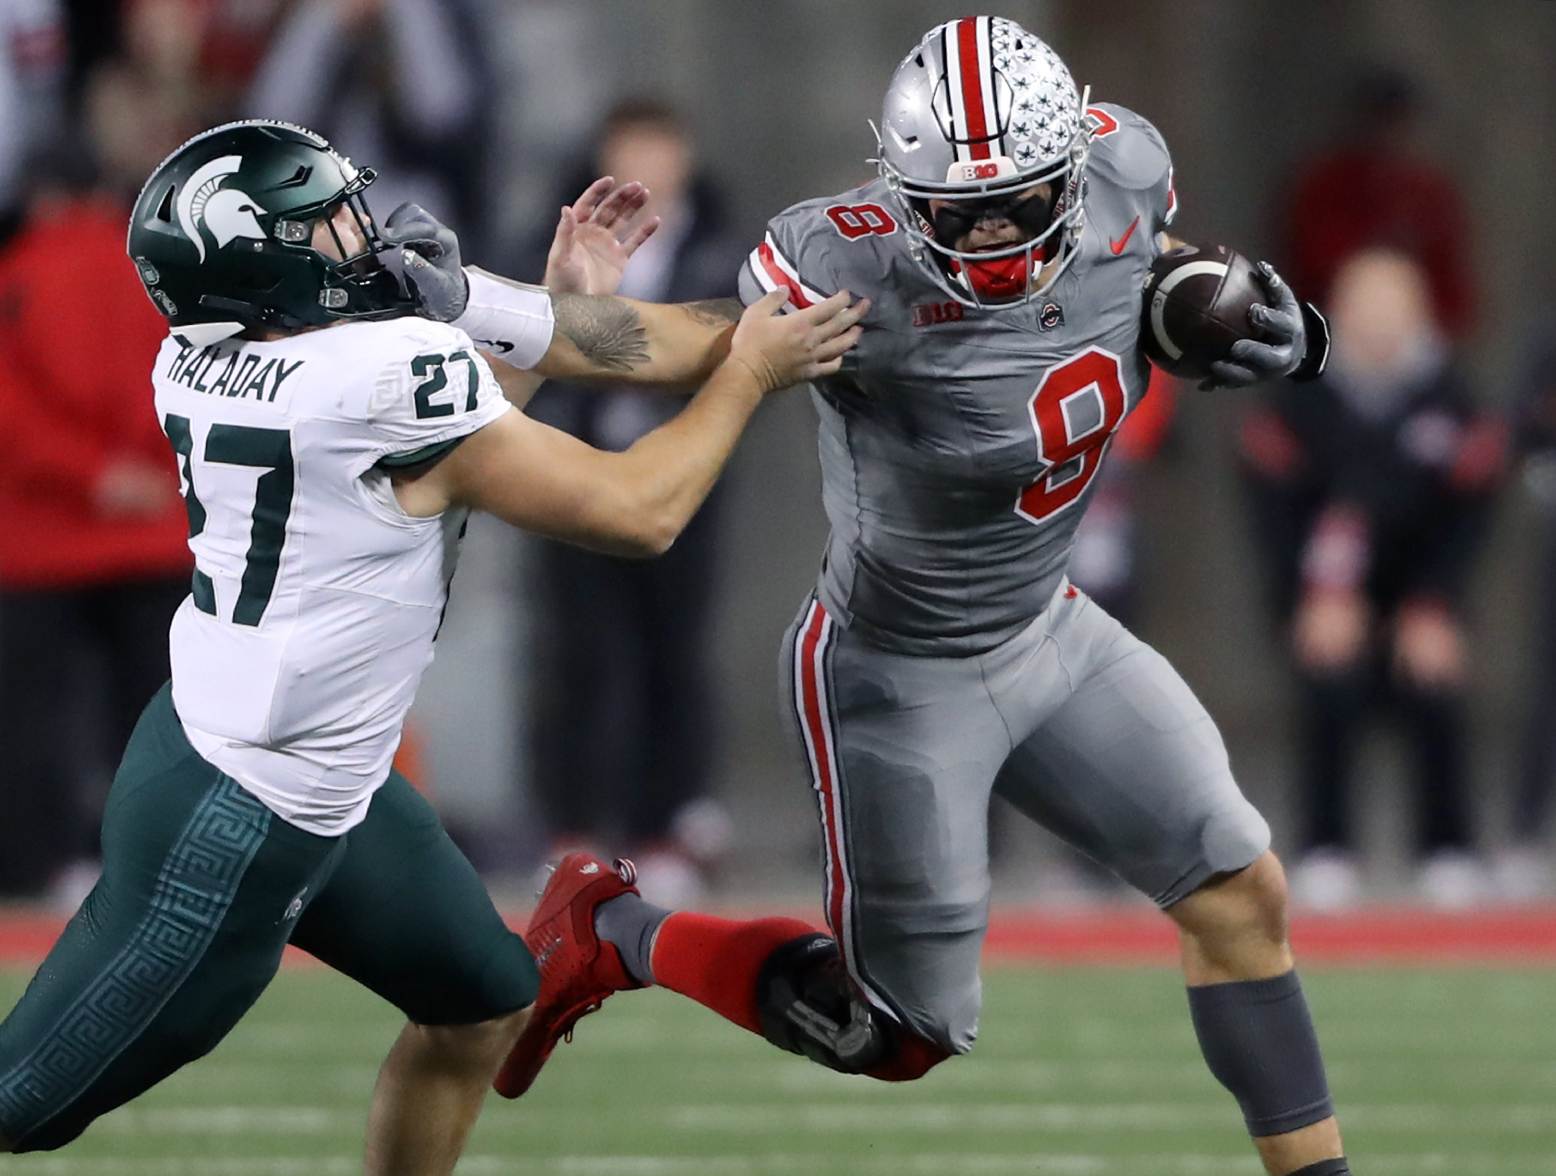 Nov 11, 2023; Columbus, Ohio, USA; Ohio State Buckeyes tight end Cade Stover (8) catches the football as Michigan State Spartans linebacker Cal Haladay (27) makes the tackle during the first quarter at Ohio Stadium. Credit: Joseph Maiorana-USA TODAY Sports